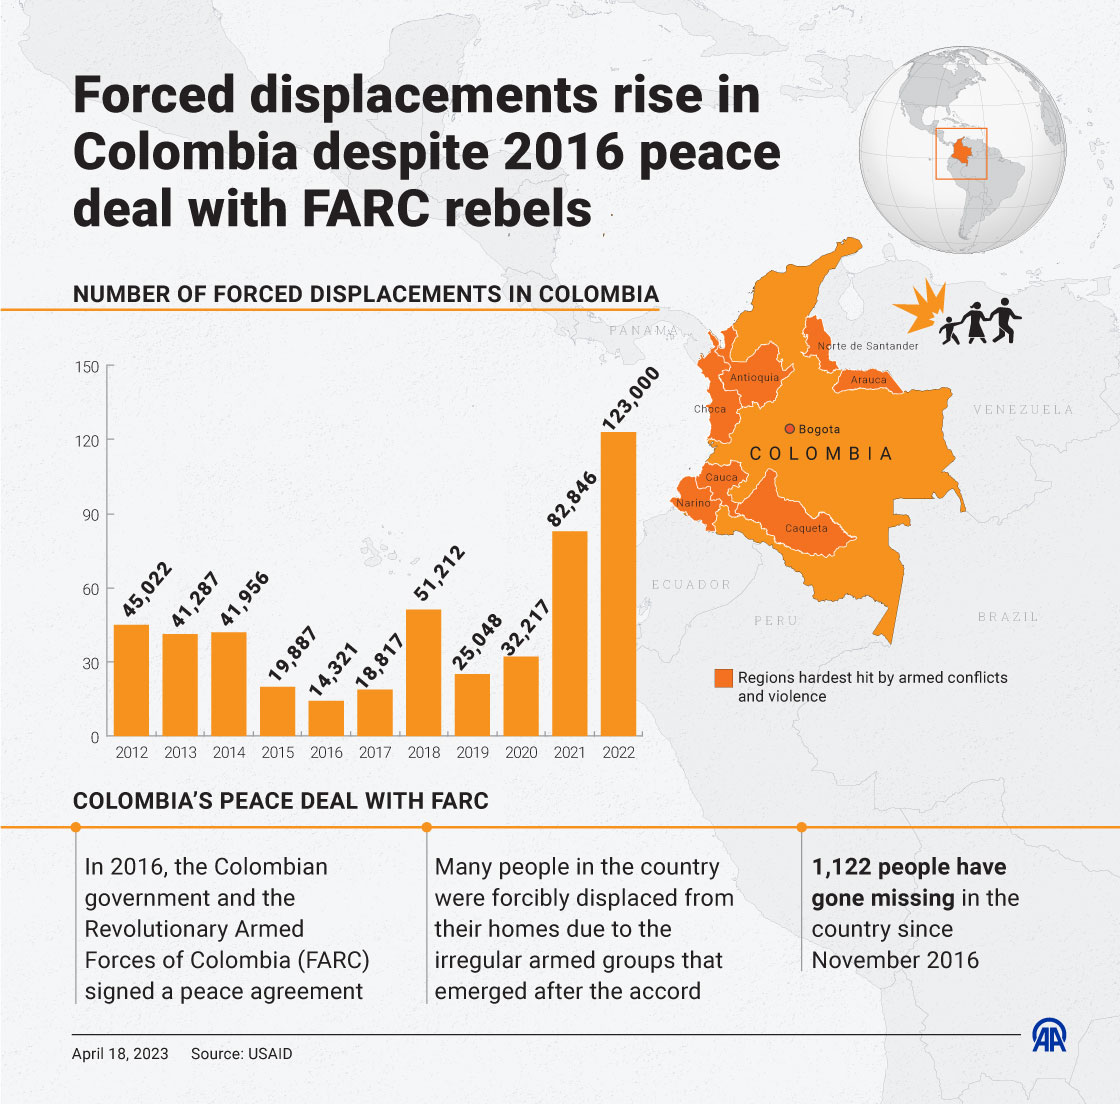 Forced displacements rise in Colombia despite 2016 peace deal with FARC rebels